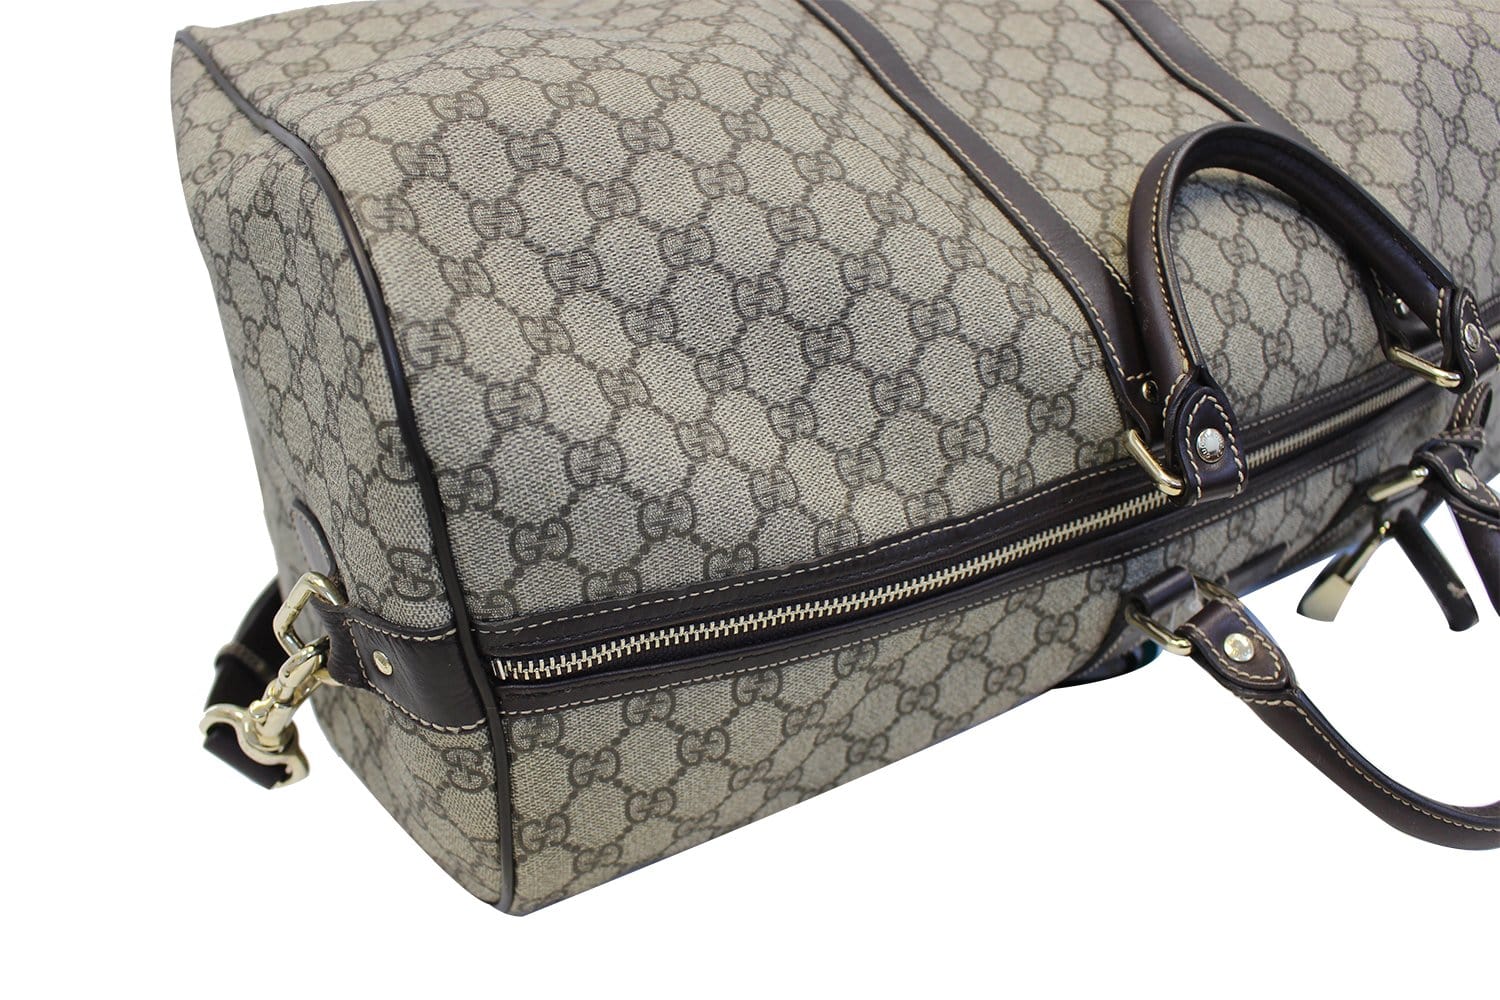 Gucci, Bags, Gucci Fiat 50 Limited Edition Duffle